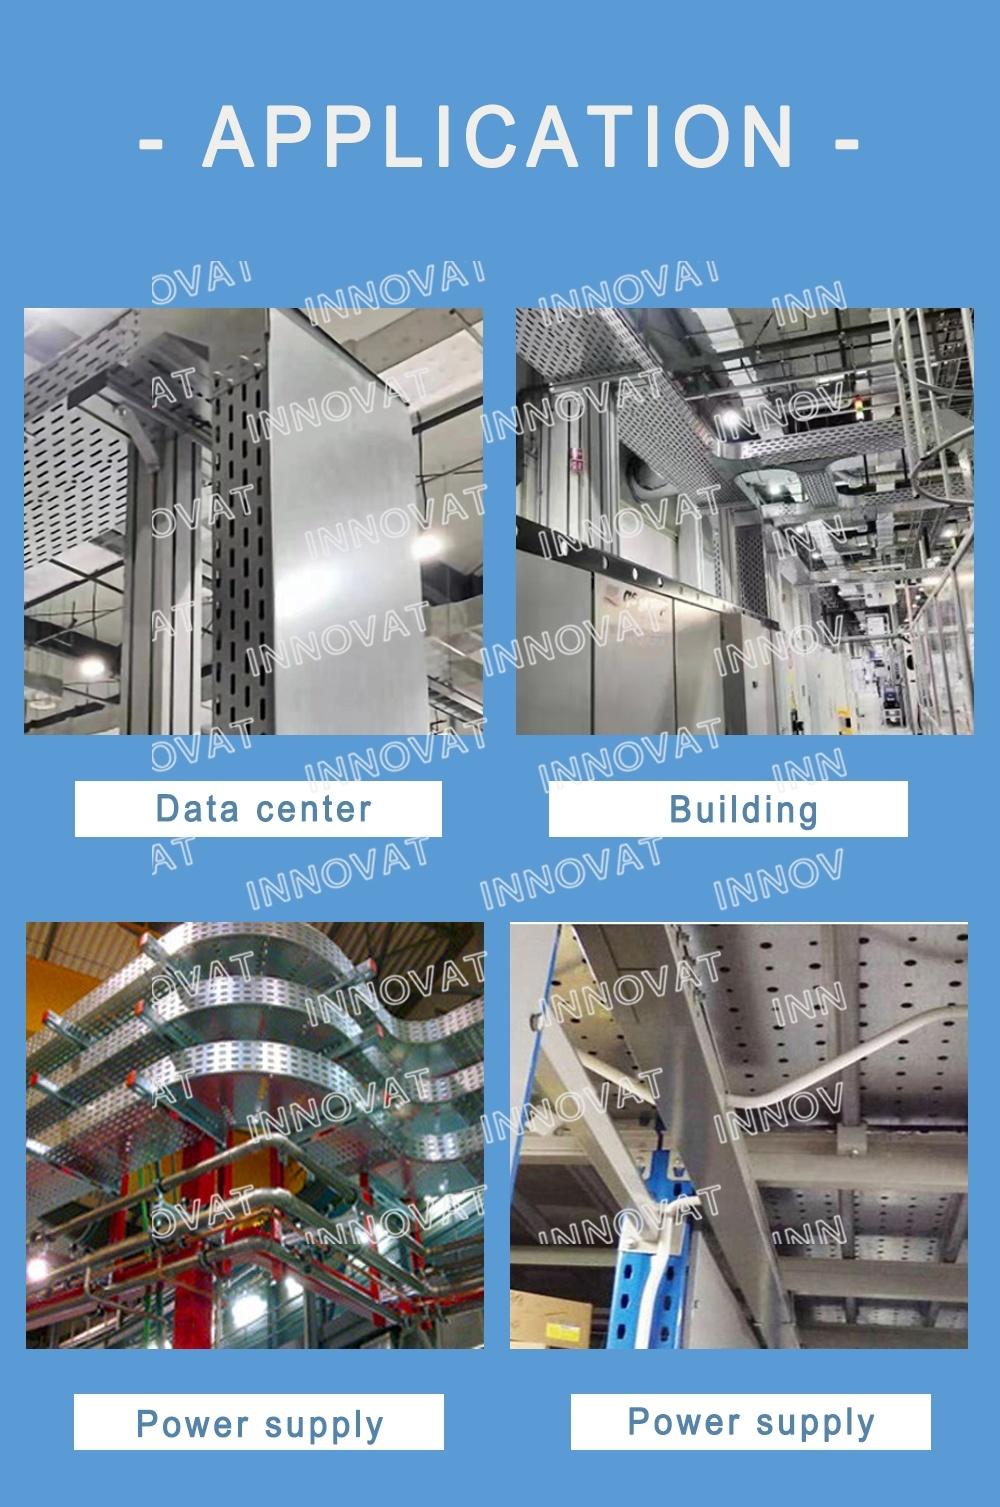 Galvanized Outdoor Telecom Perforated Cable Tray with Holes at Competitive Price Made From Vietnam